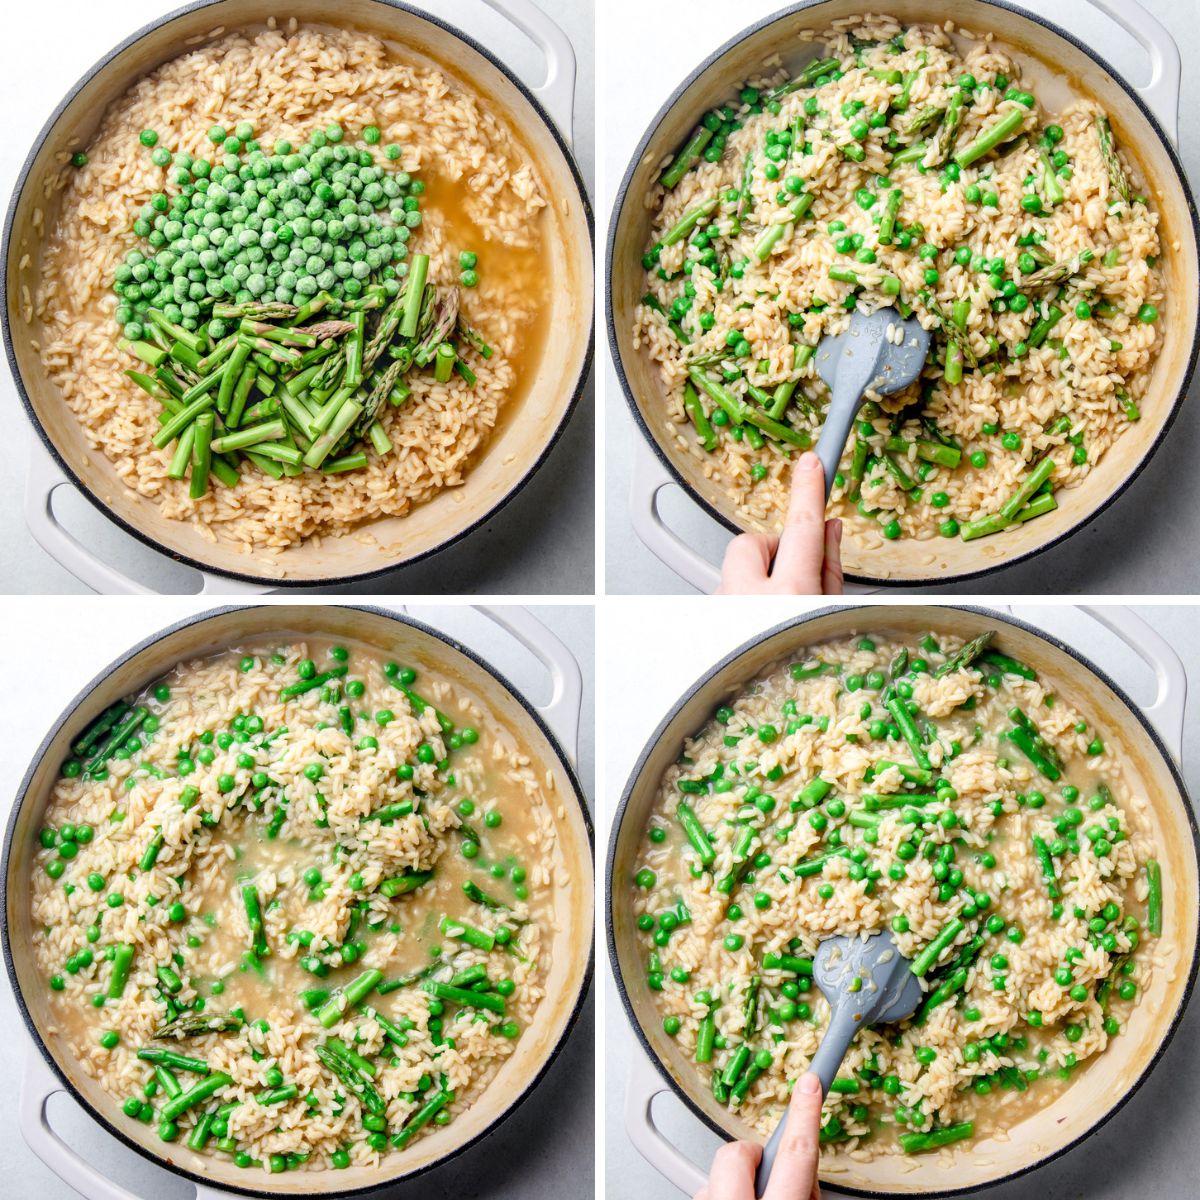 Process photos of adding peas and chopped asparagus to the risotto.